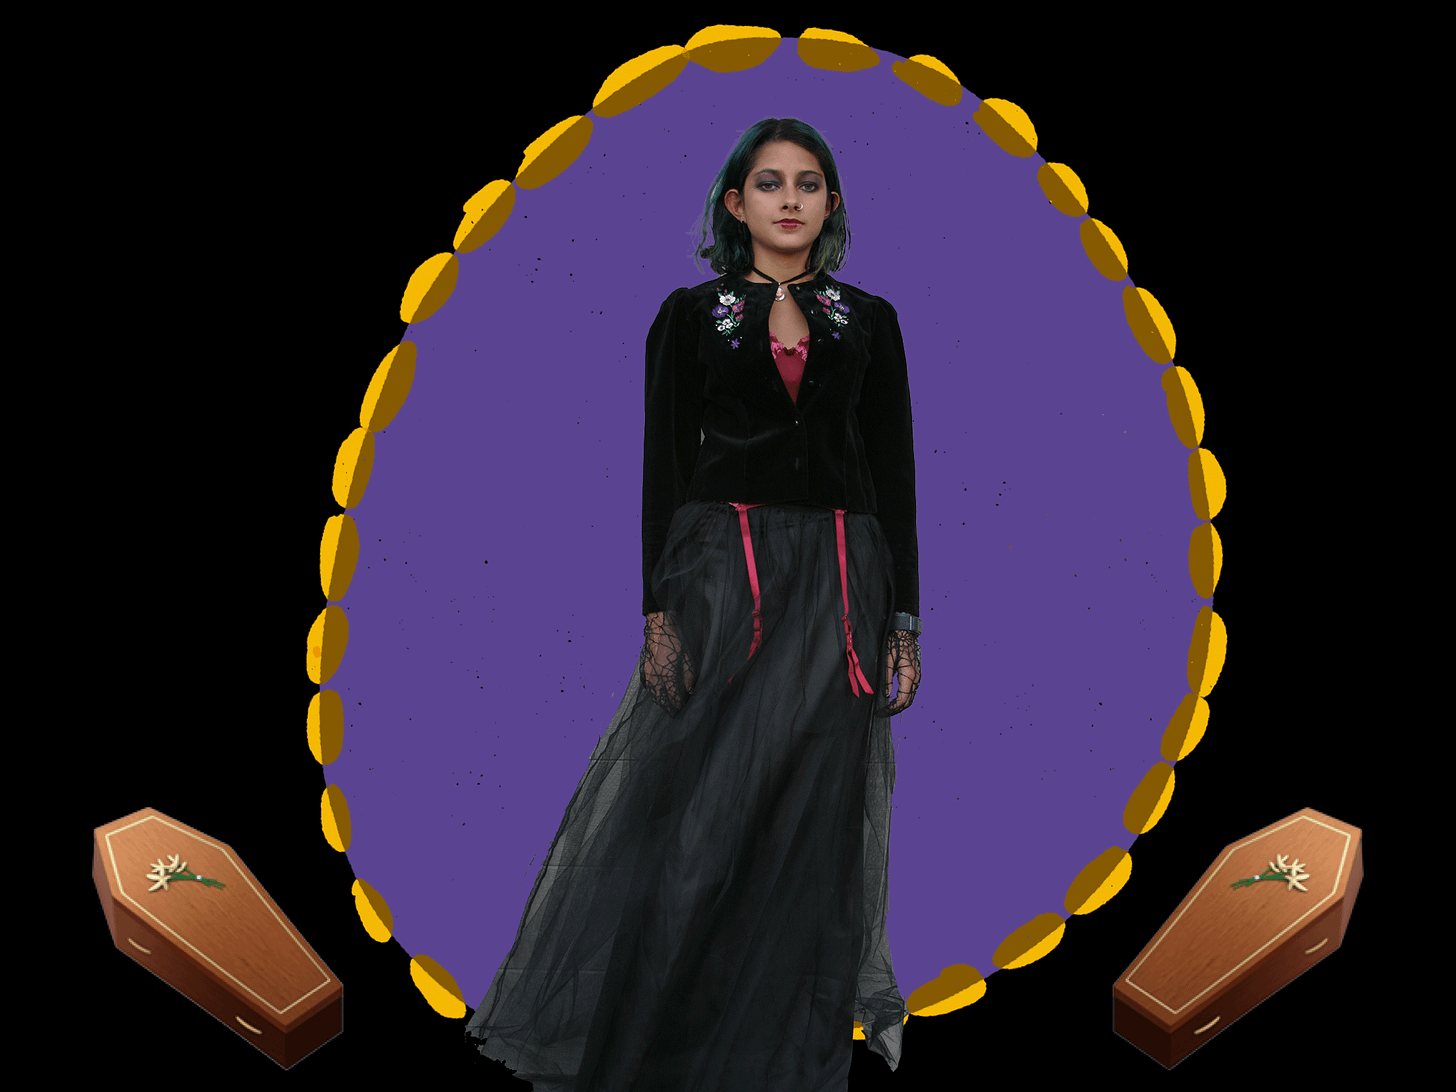 Tash is wearing some questionable fashion: blue highlights in her hair, dark eyeshadow, a thrifted velvet jacket and pendant, a corset that is not attached to stockings and a black tulle skirt. The photo has two coffin emojis on either side and a black background. 